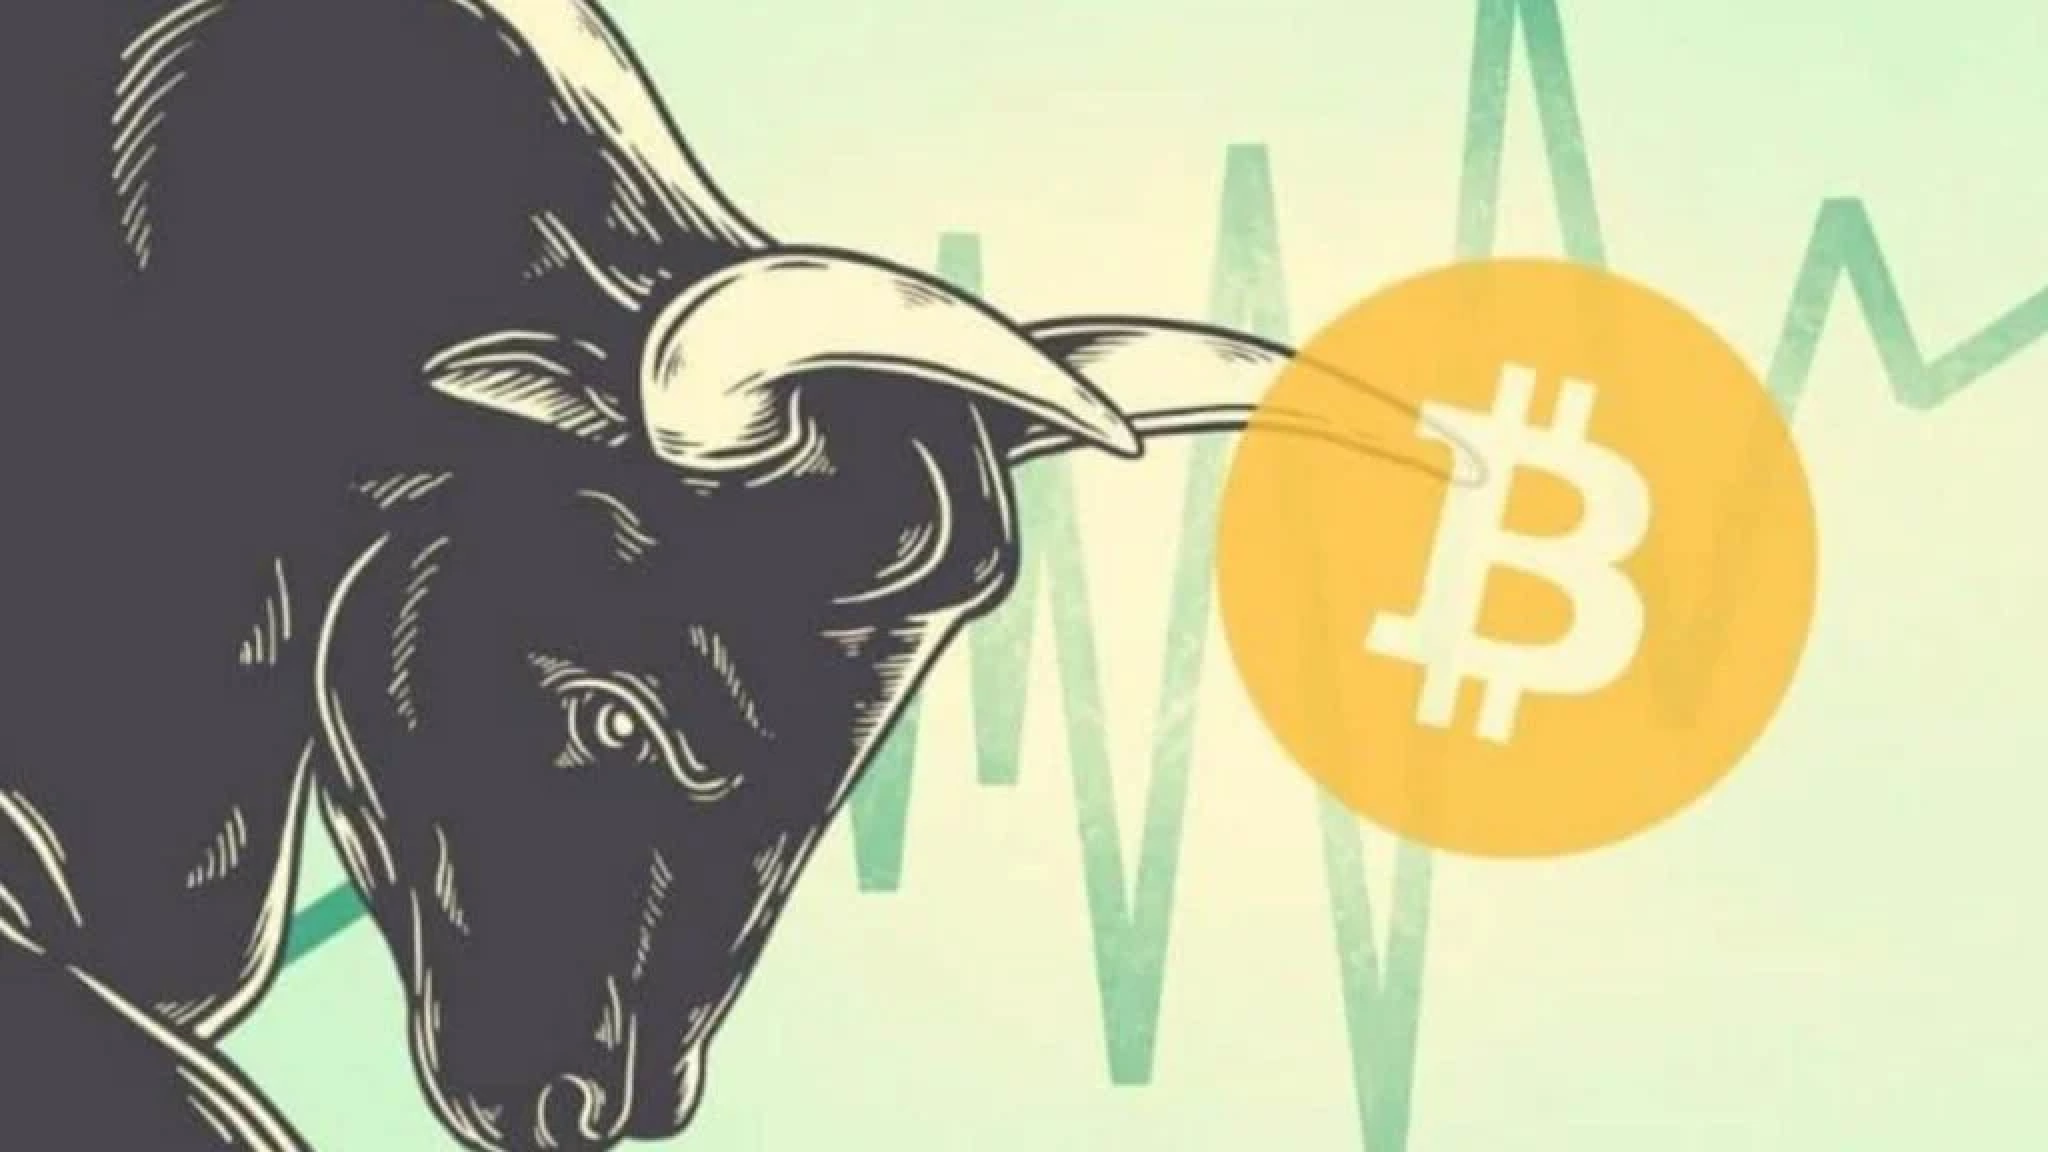 When Is The Next Crypto Bull Run Expected? [2024 or 2025?]